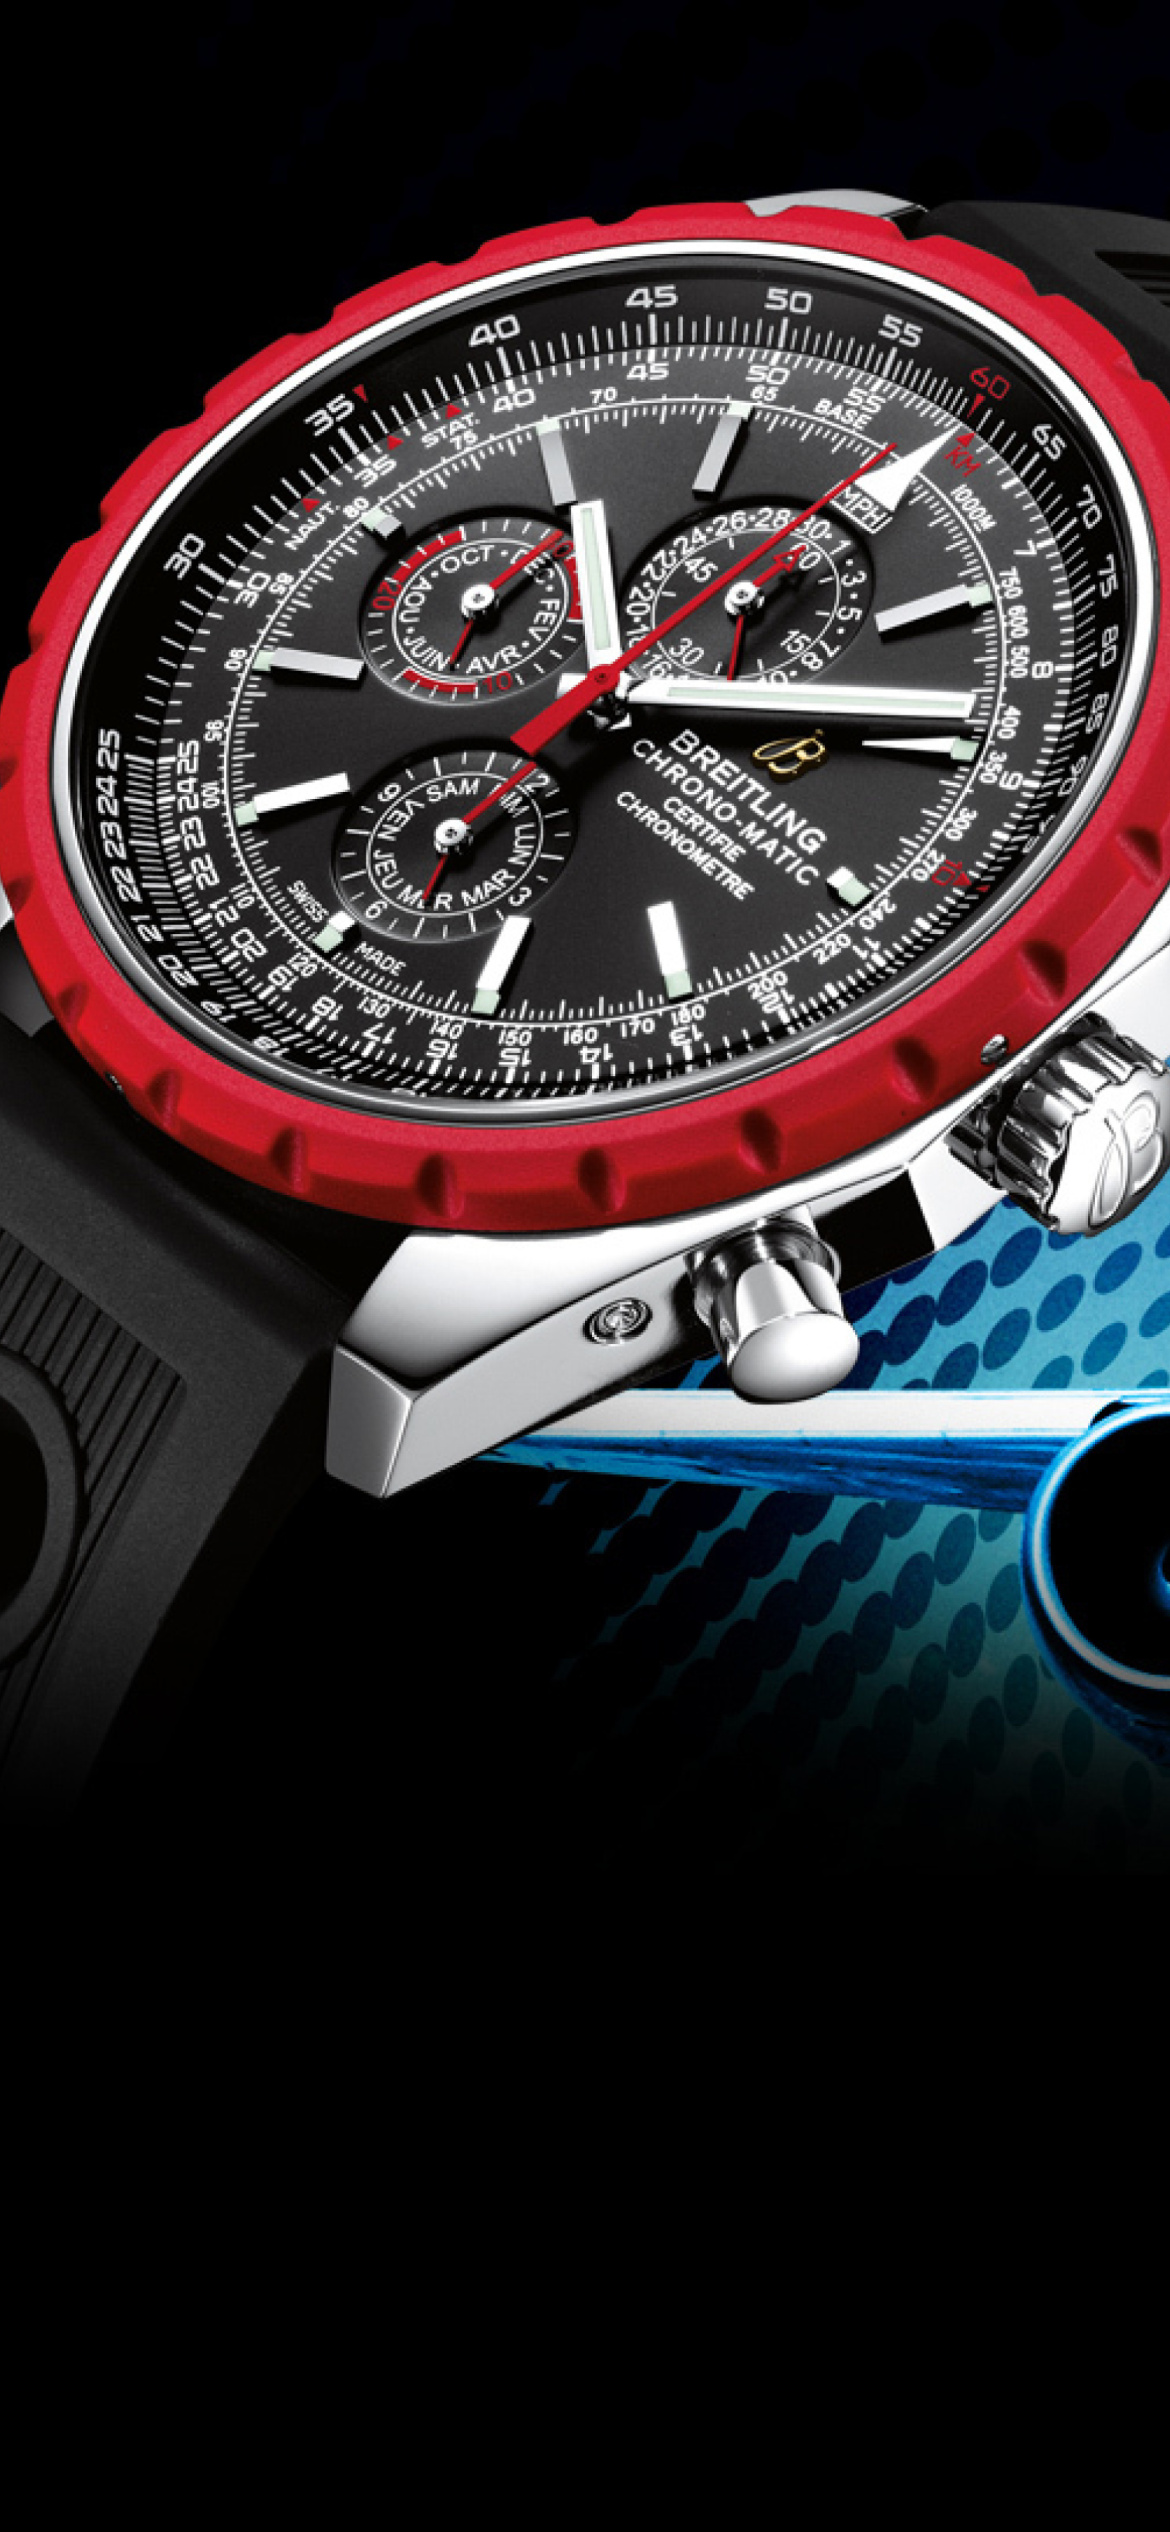 Breitling Chrono Matic Watches wallpaper 1170x2532